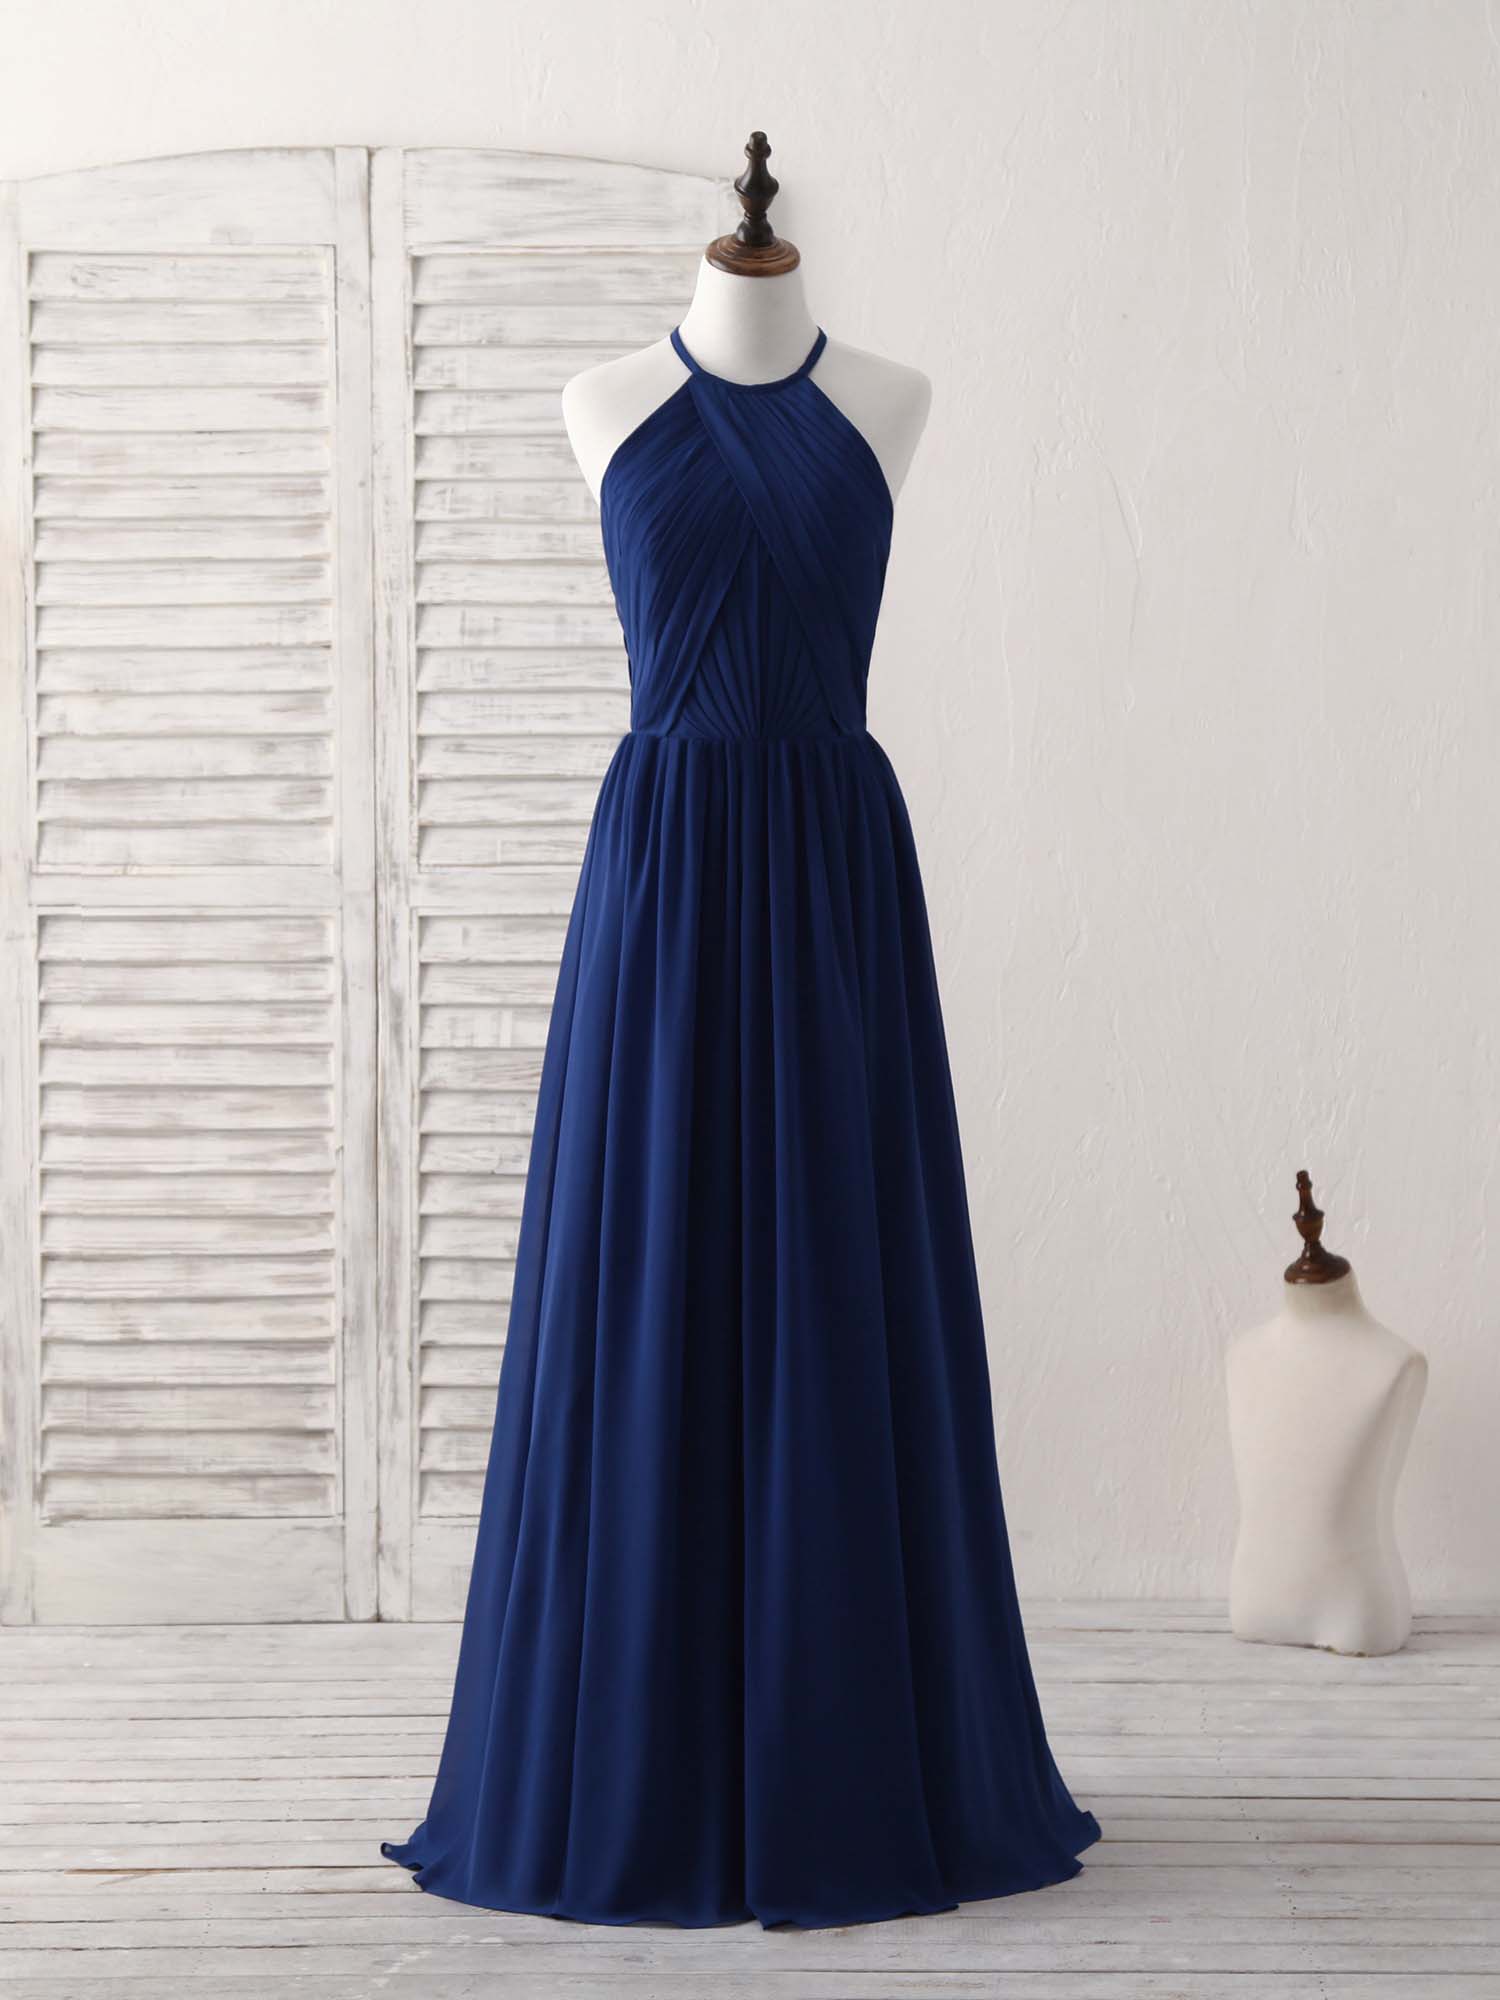 Bedazzled Royal Blue Sequin Simple Long Prom Dress - VQ